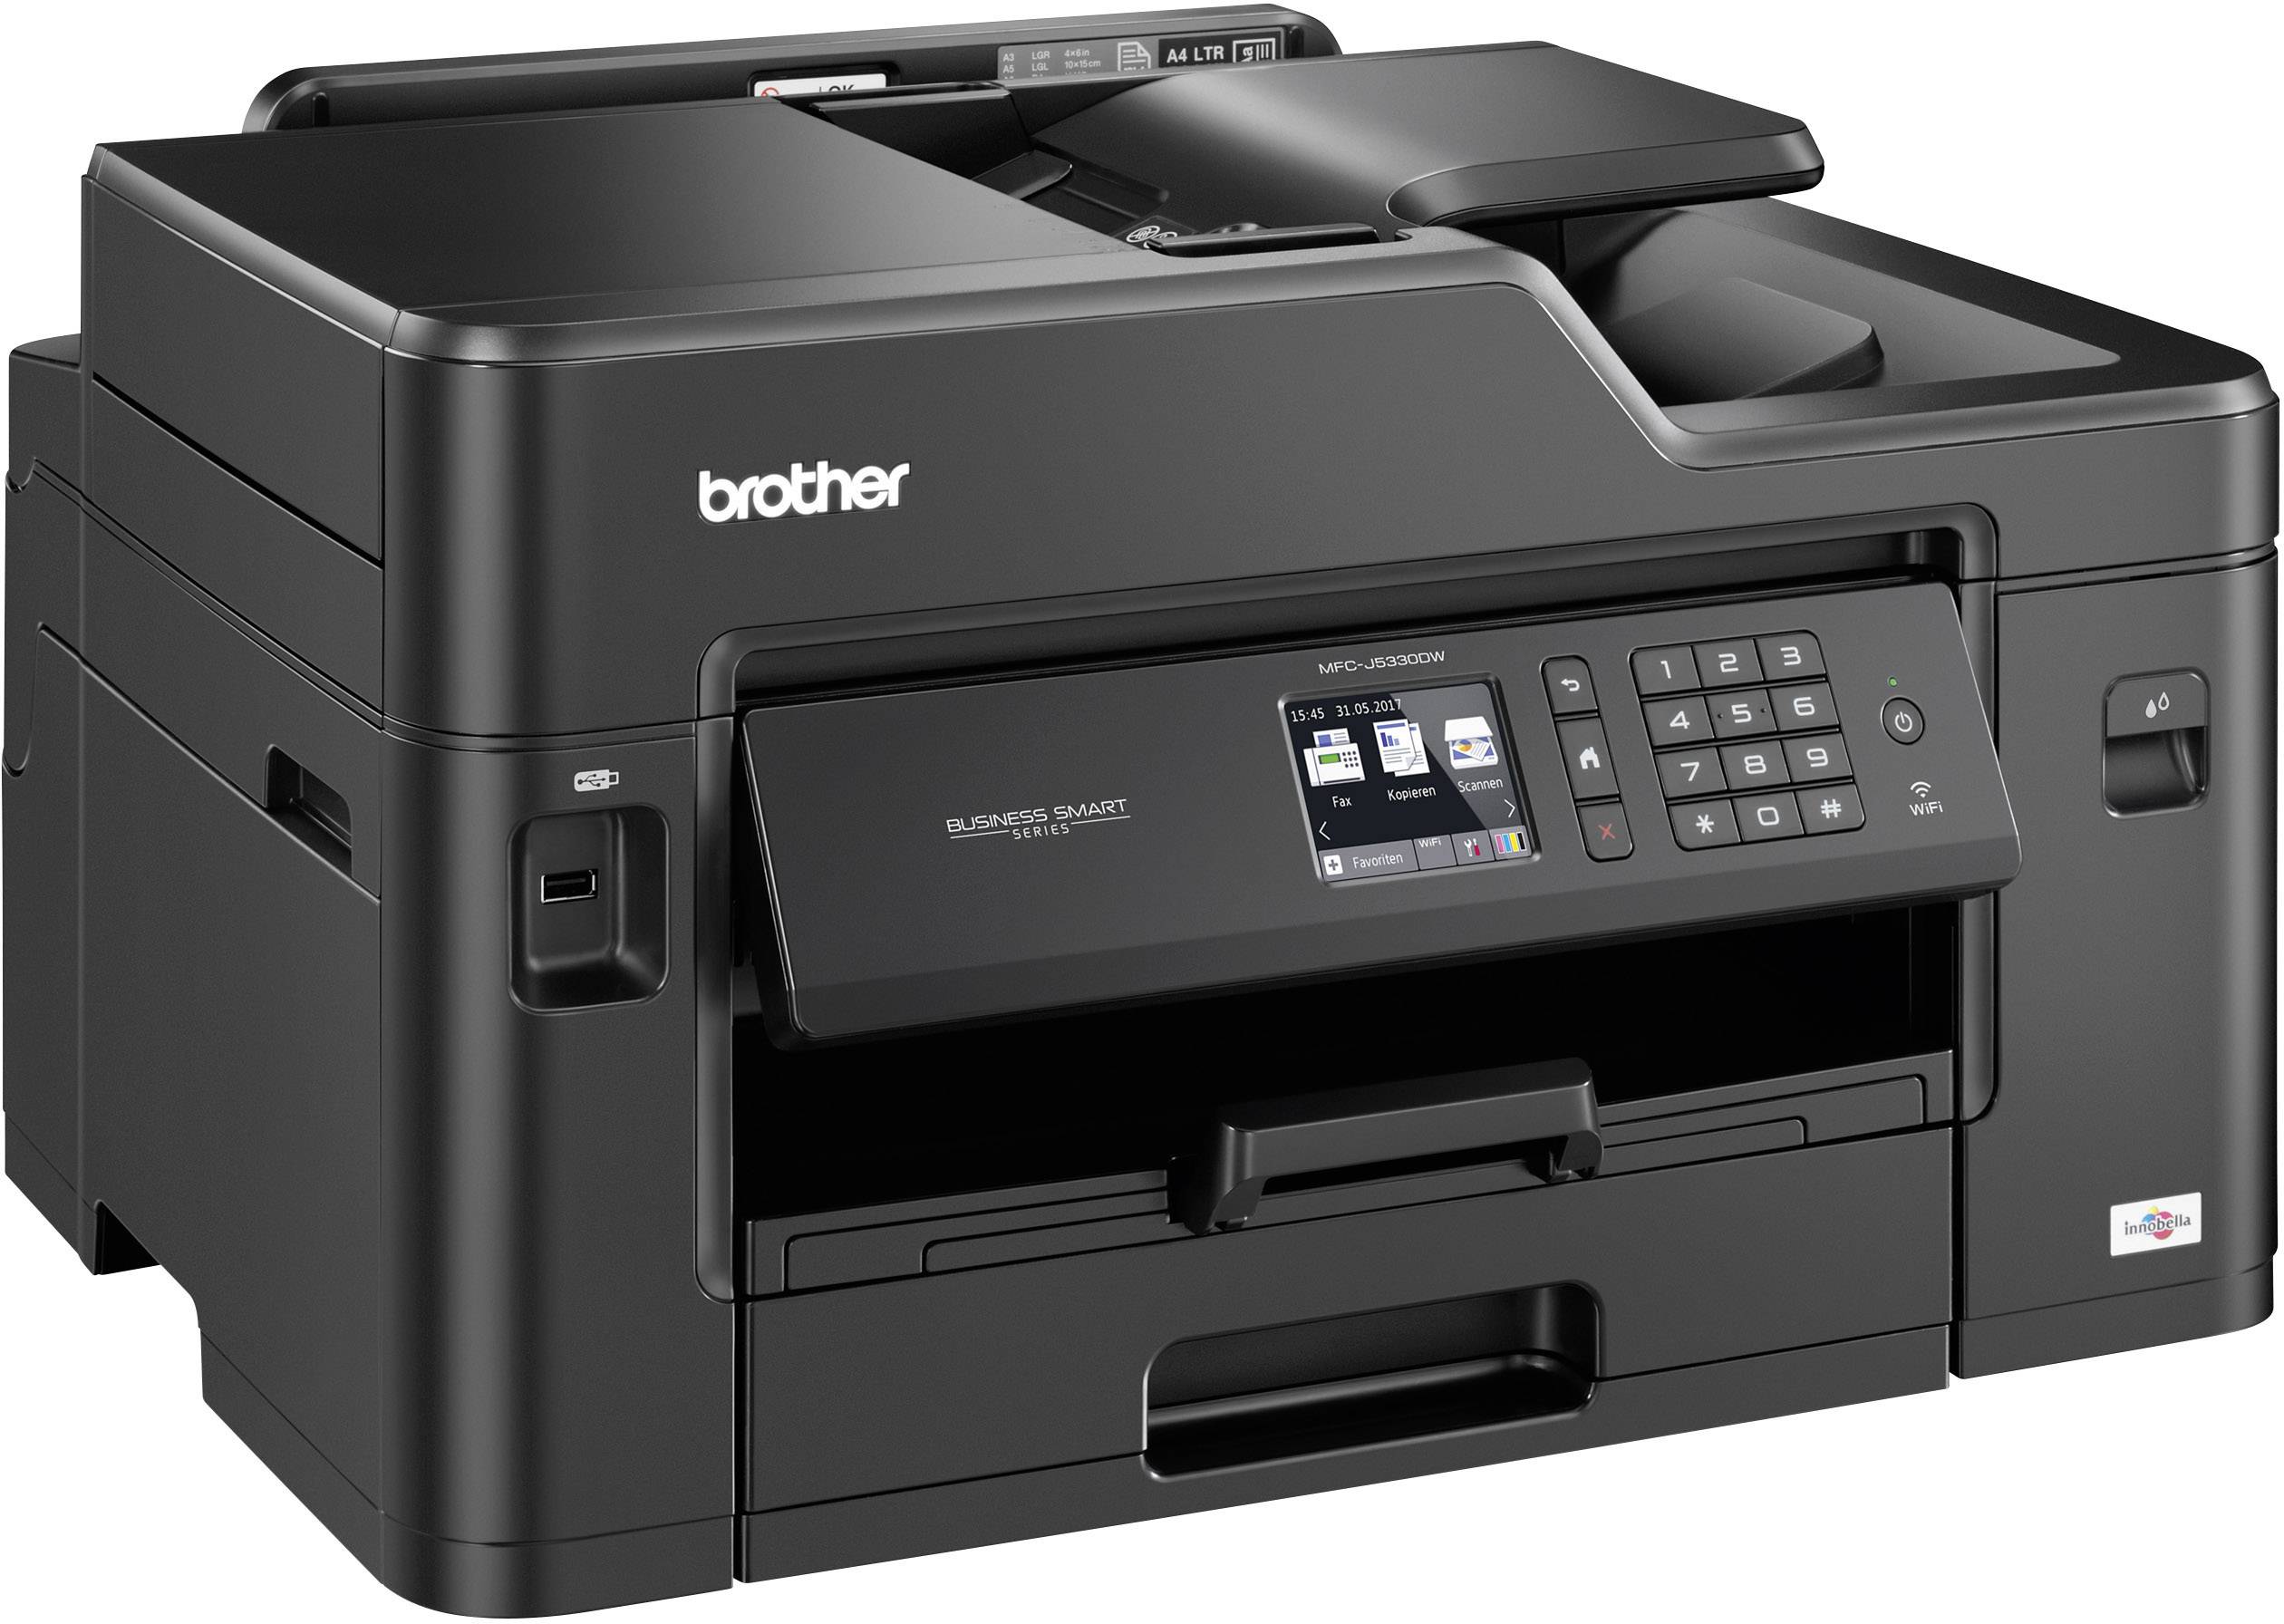 Copier & Fax Brother MFCJ5330DW Wireless Color Printer with Scanner